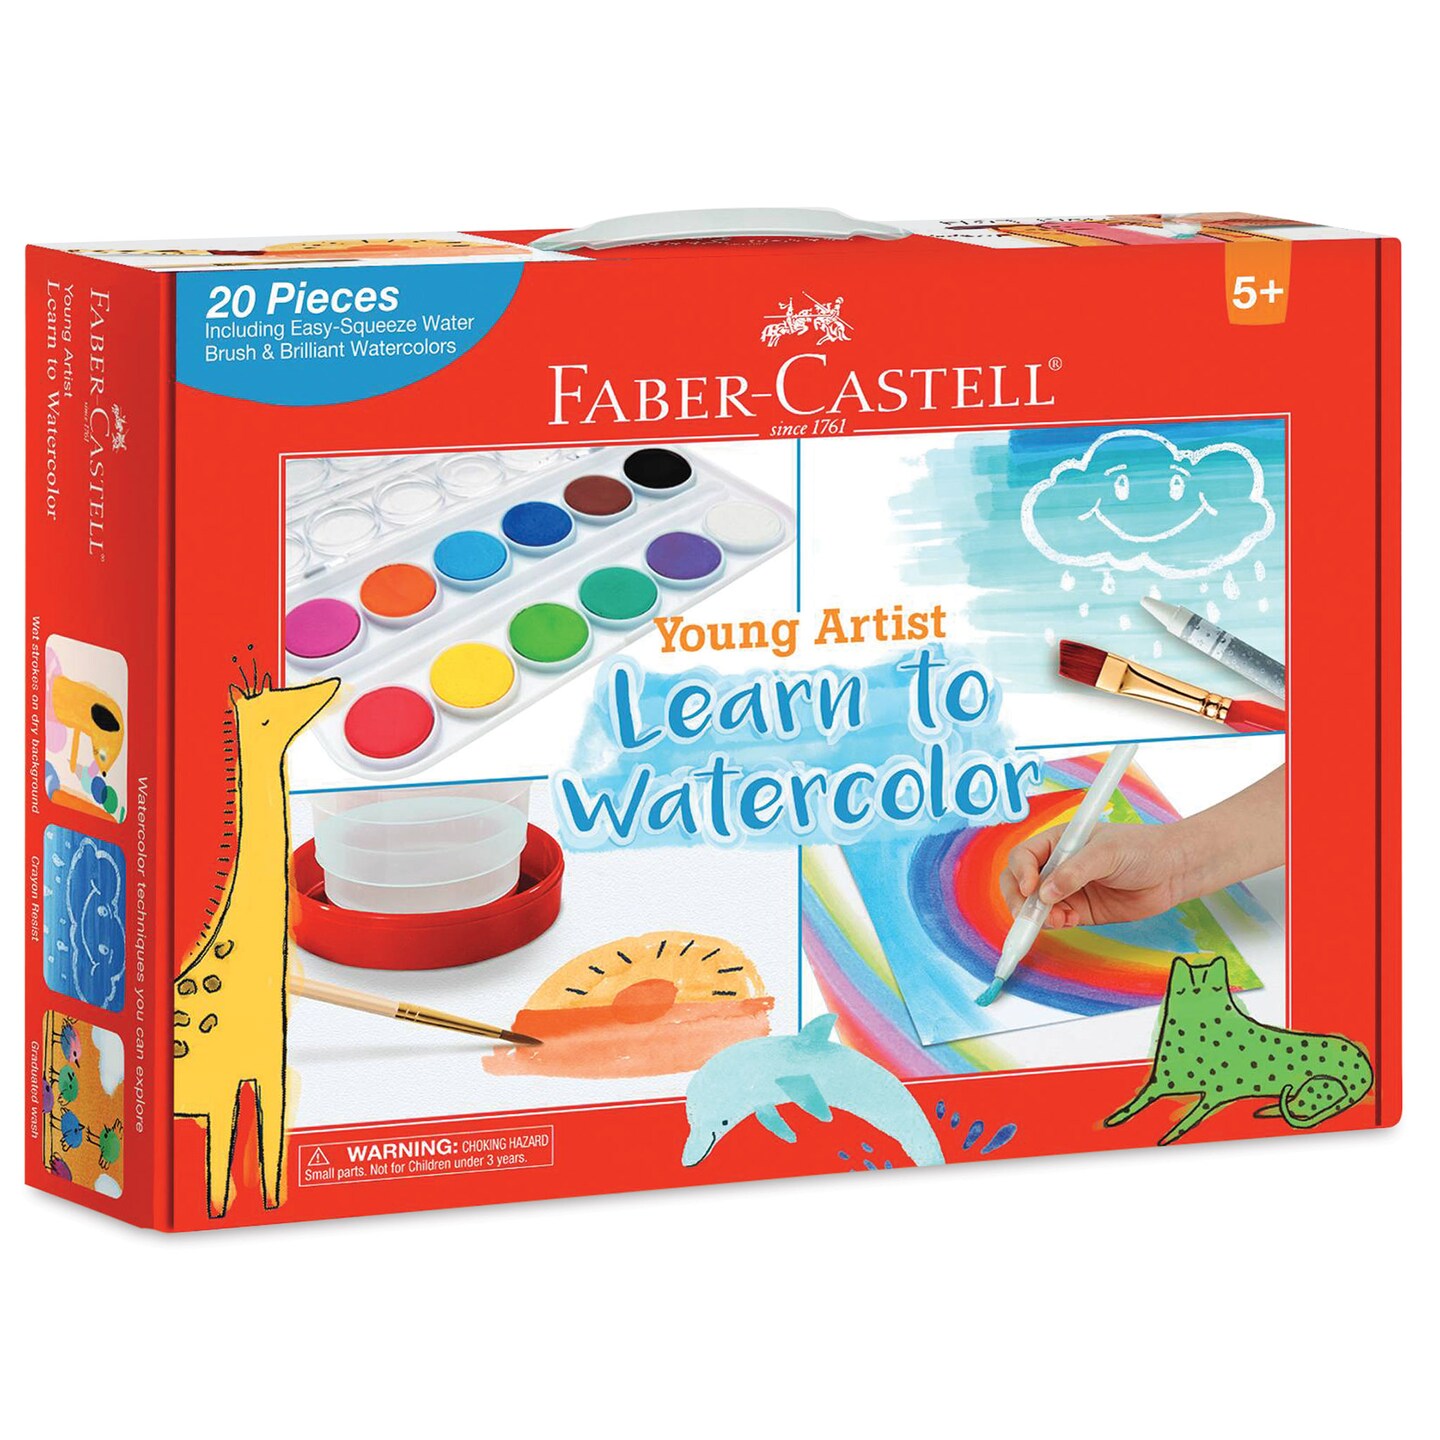 Faber-Castell Young Artist Learn to Watercolor Set